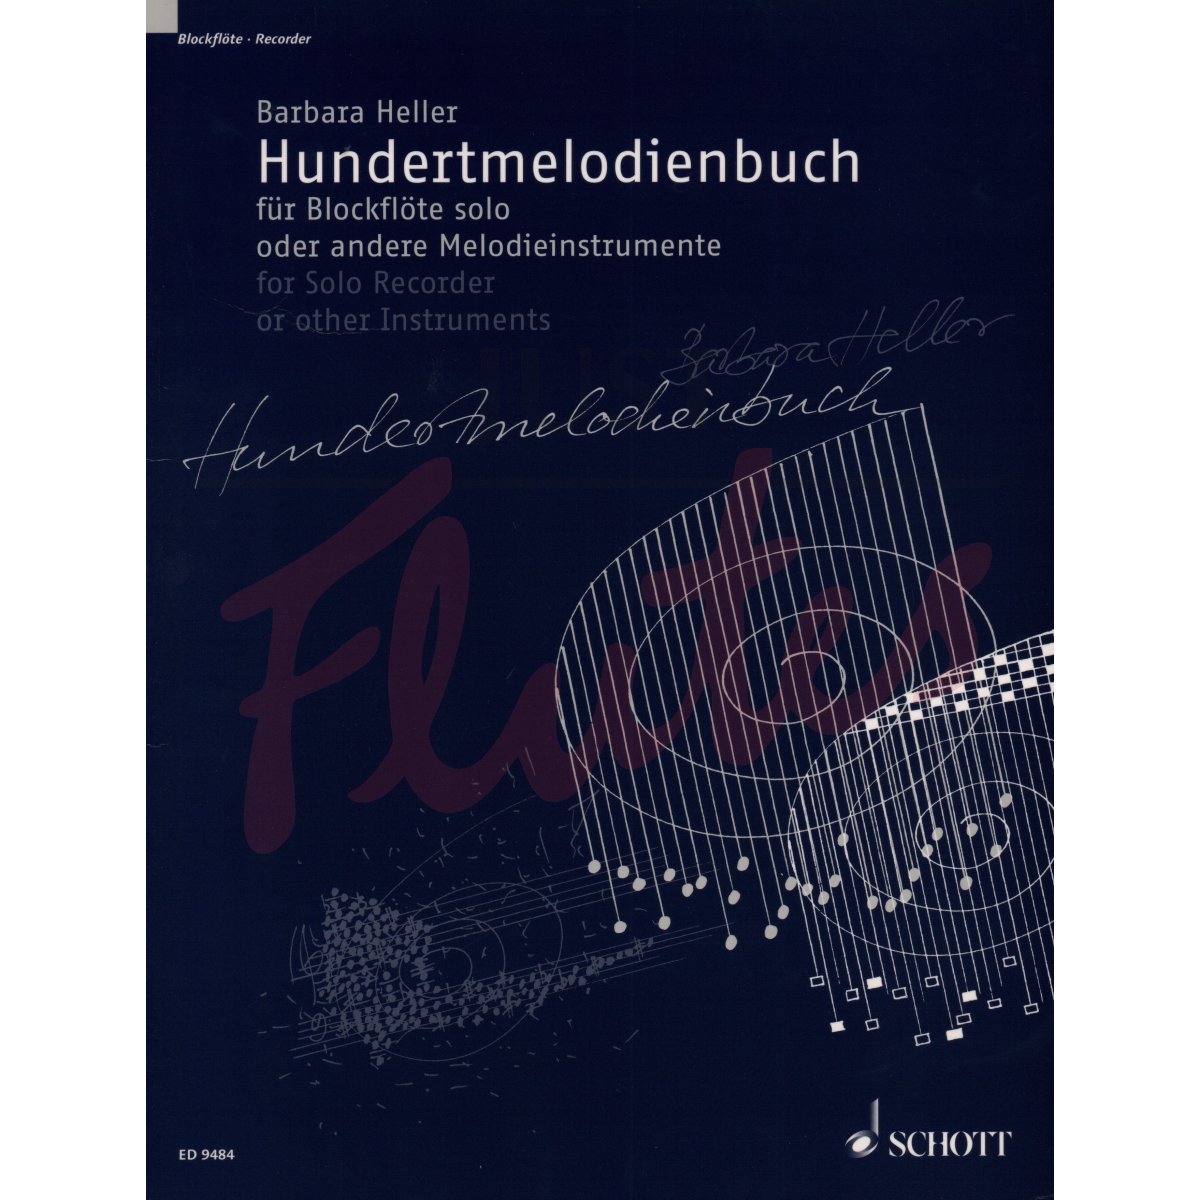 Hundertmelodienbuch (Hundred Melody Book) for Solo Recorder/Flute/Oboe/Clarinet